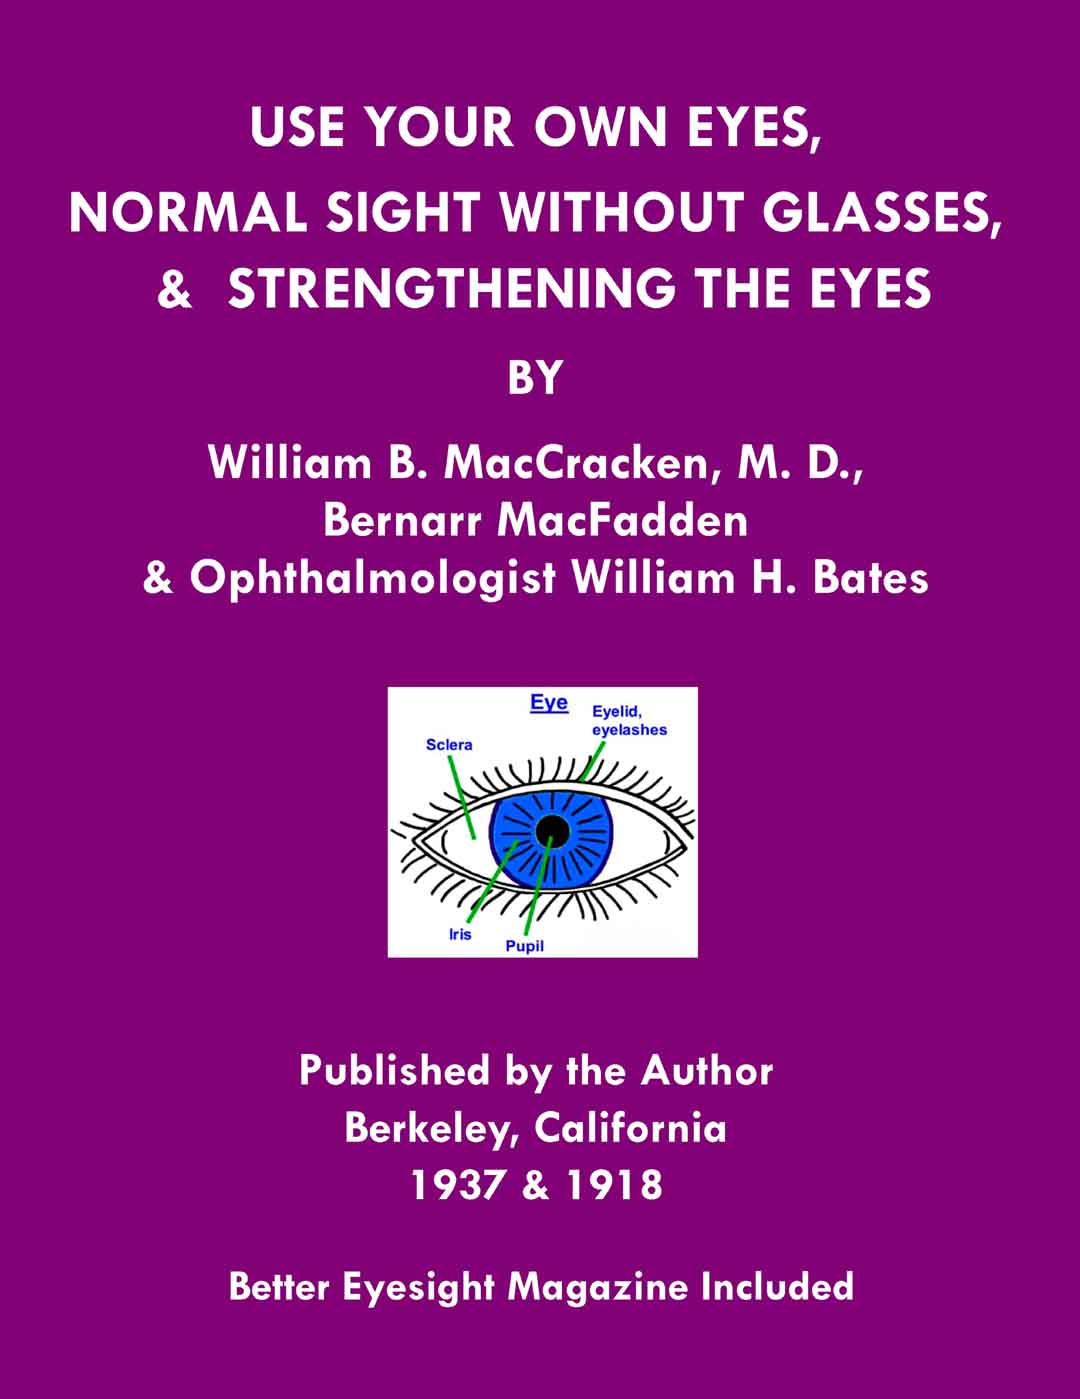 Use Your Own Eyes, Normal Sight Without Glasses and Strengthening The Eyes-Better Eyesight Magazine by William B MacCracken, Bernarr MacFadden and William H. Bates